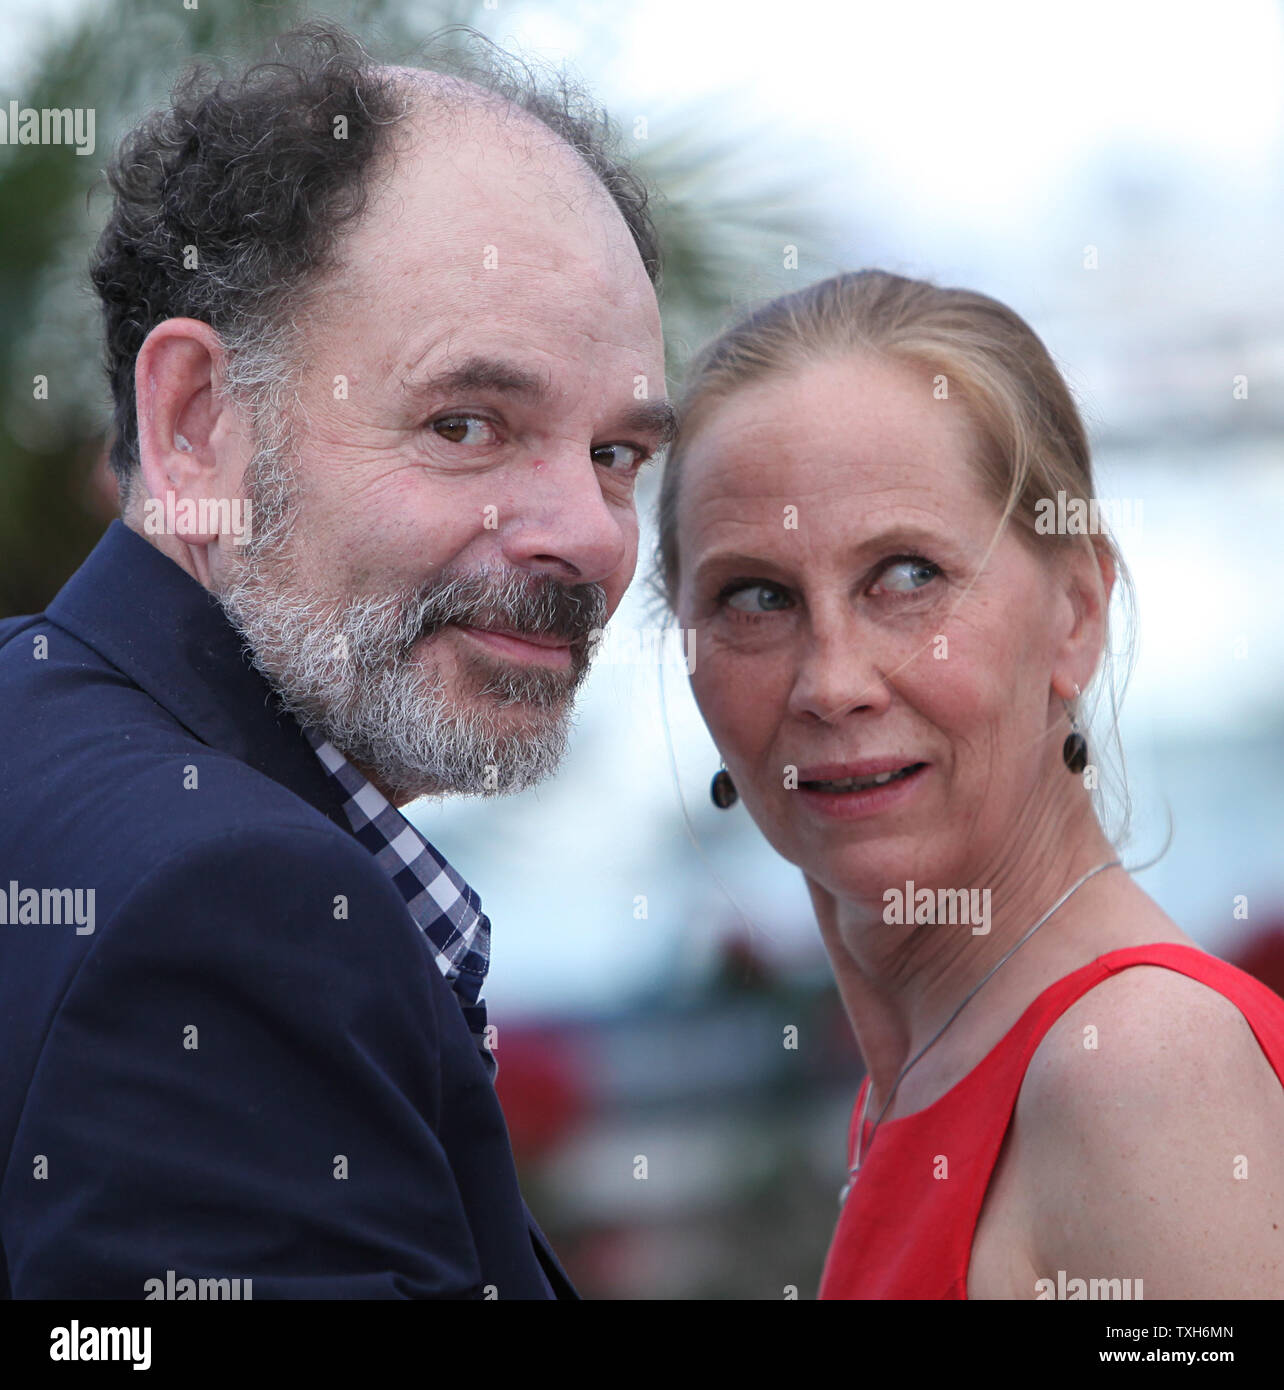 Jean-Pierre Darroussin (L) and Kati Outinen arrive at a photocall for the film 'Le Havre' during the 64th annual Cannes International Film Festival in Cannes, France on May 17, 2011.   UPI/David Silpa Stock Photo